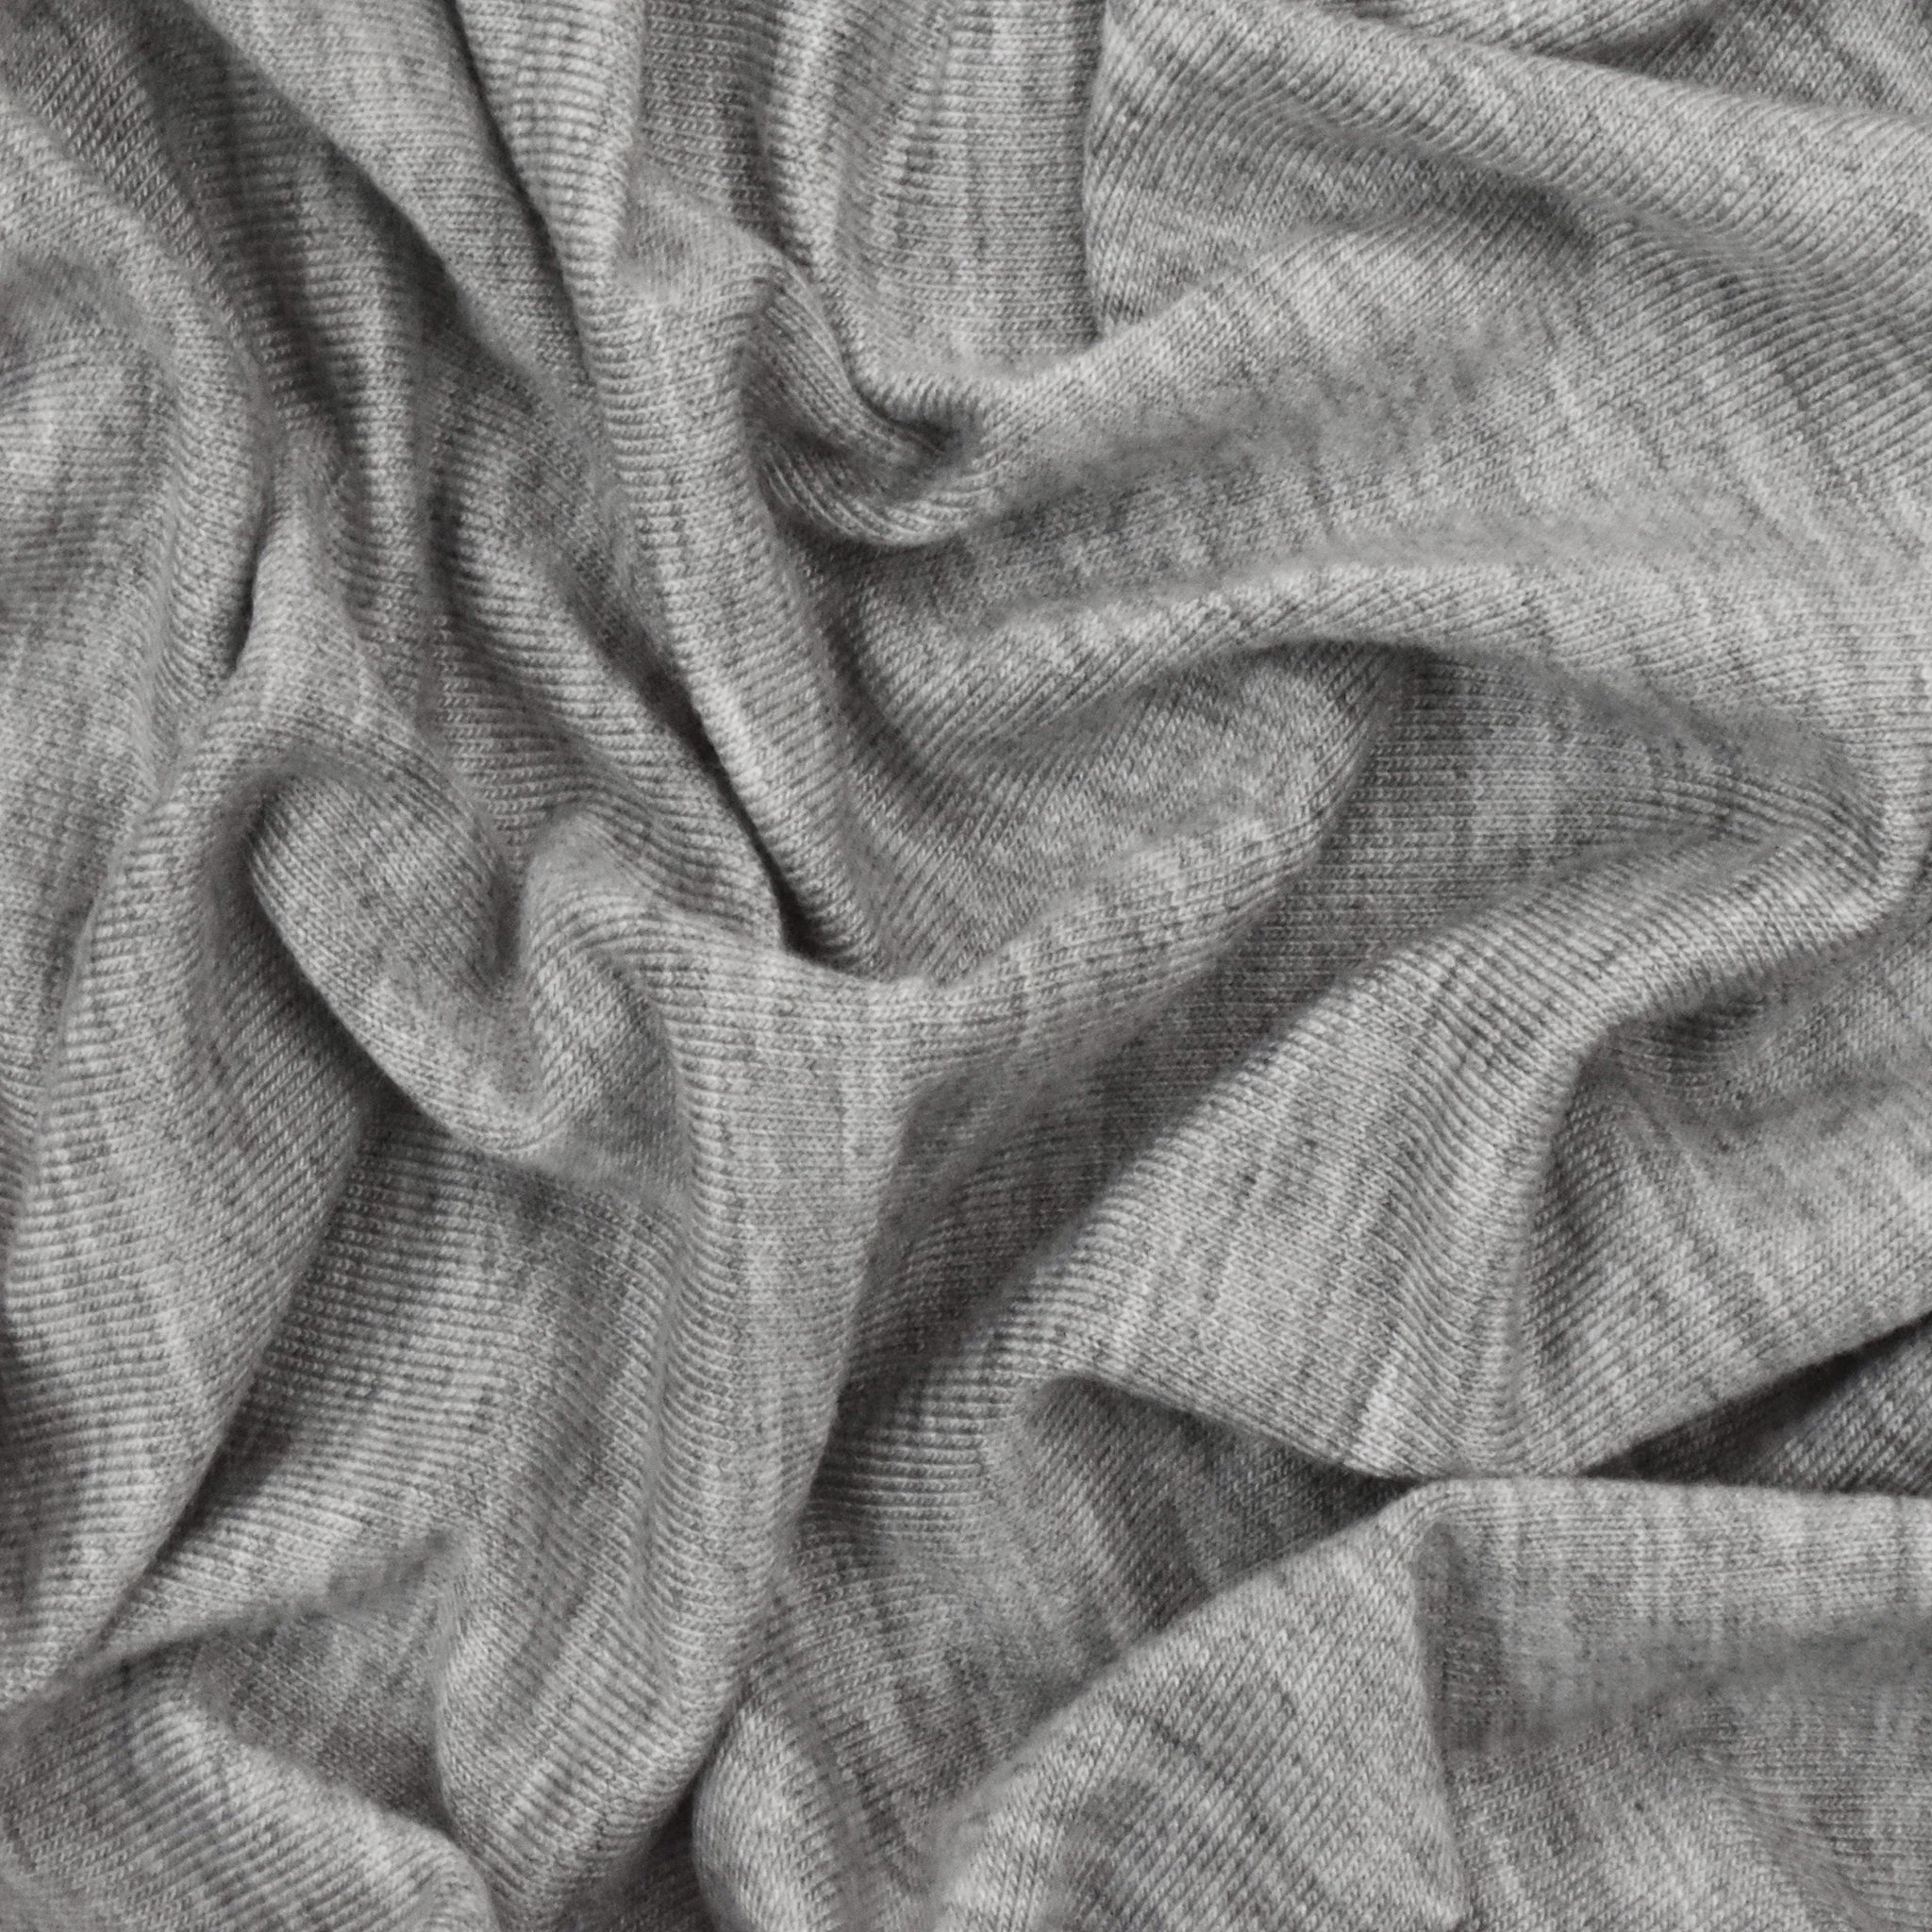 60 Modal Cotton Blend Solid Heather Gray Jersey Knit Fabric by The Yard